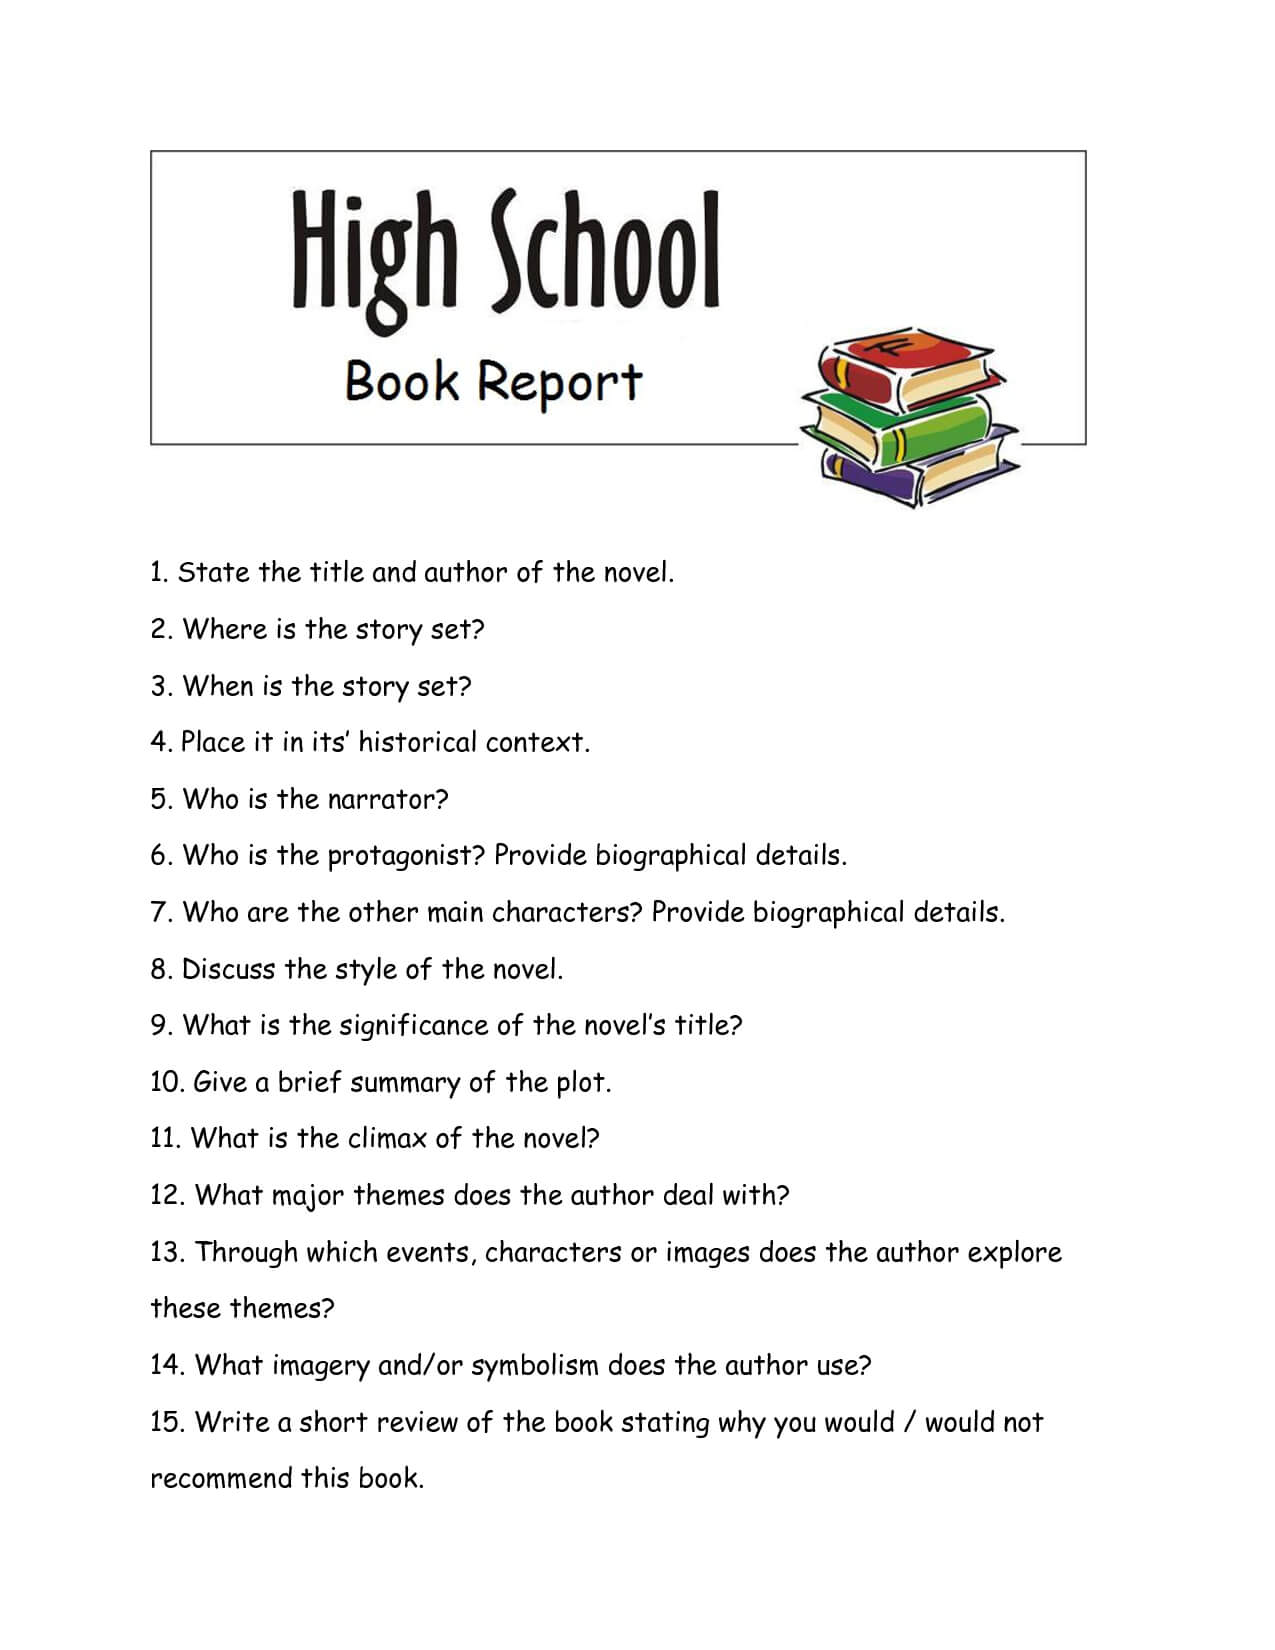 Writing A High School Book Report - How To Write A Book Pertaining To Book Report Template High School